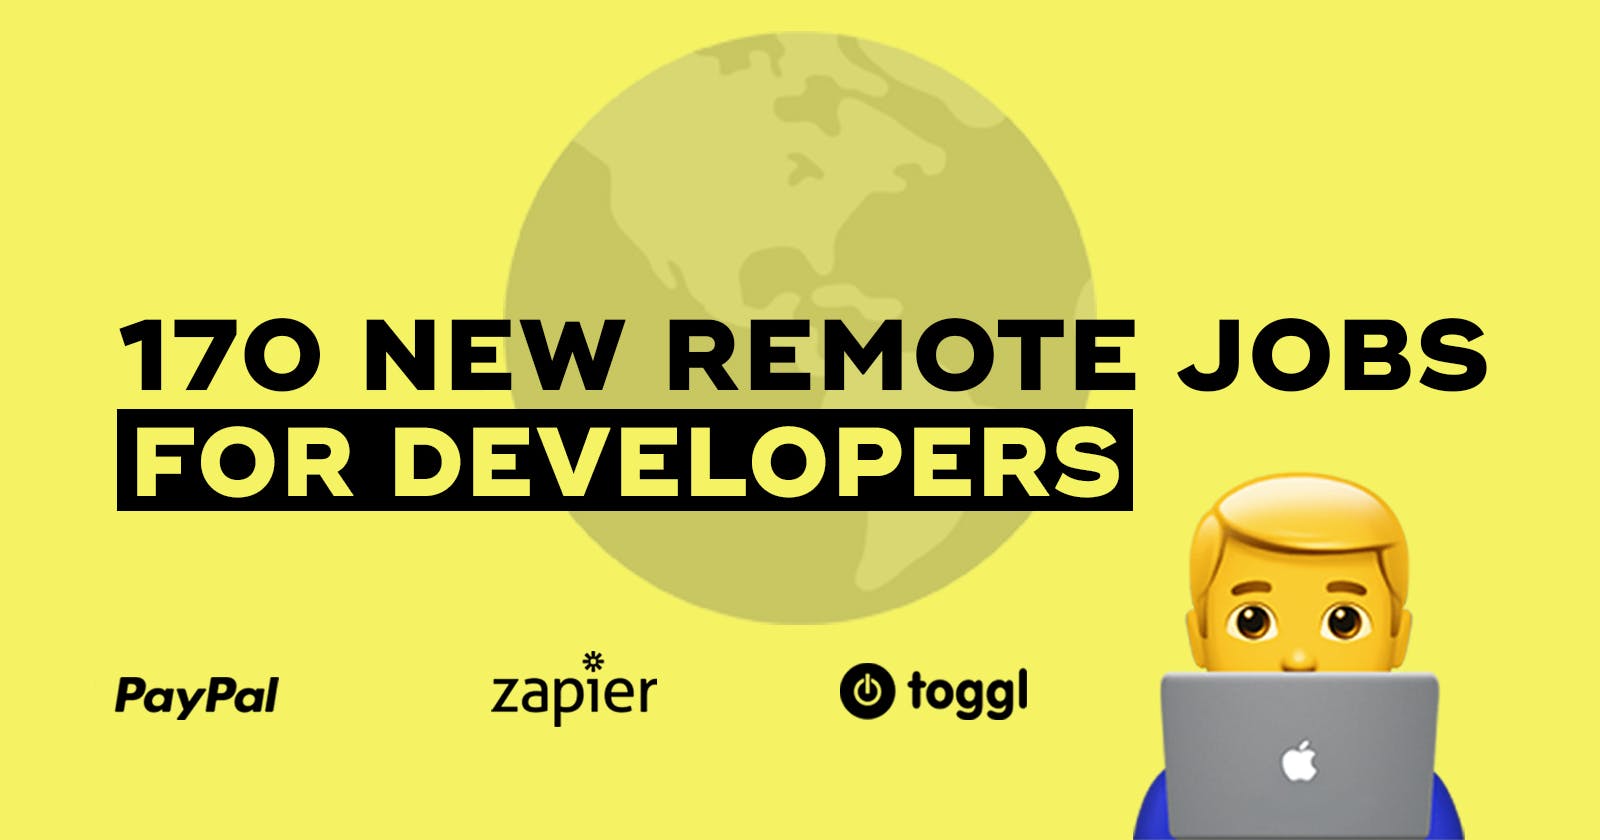 170 new remote jobs for developers at PayPal, Zapier, Toggl, and others!